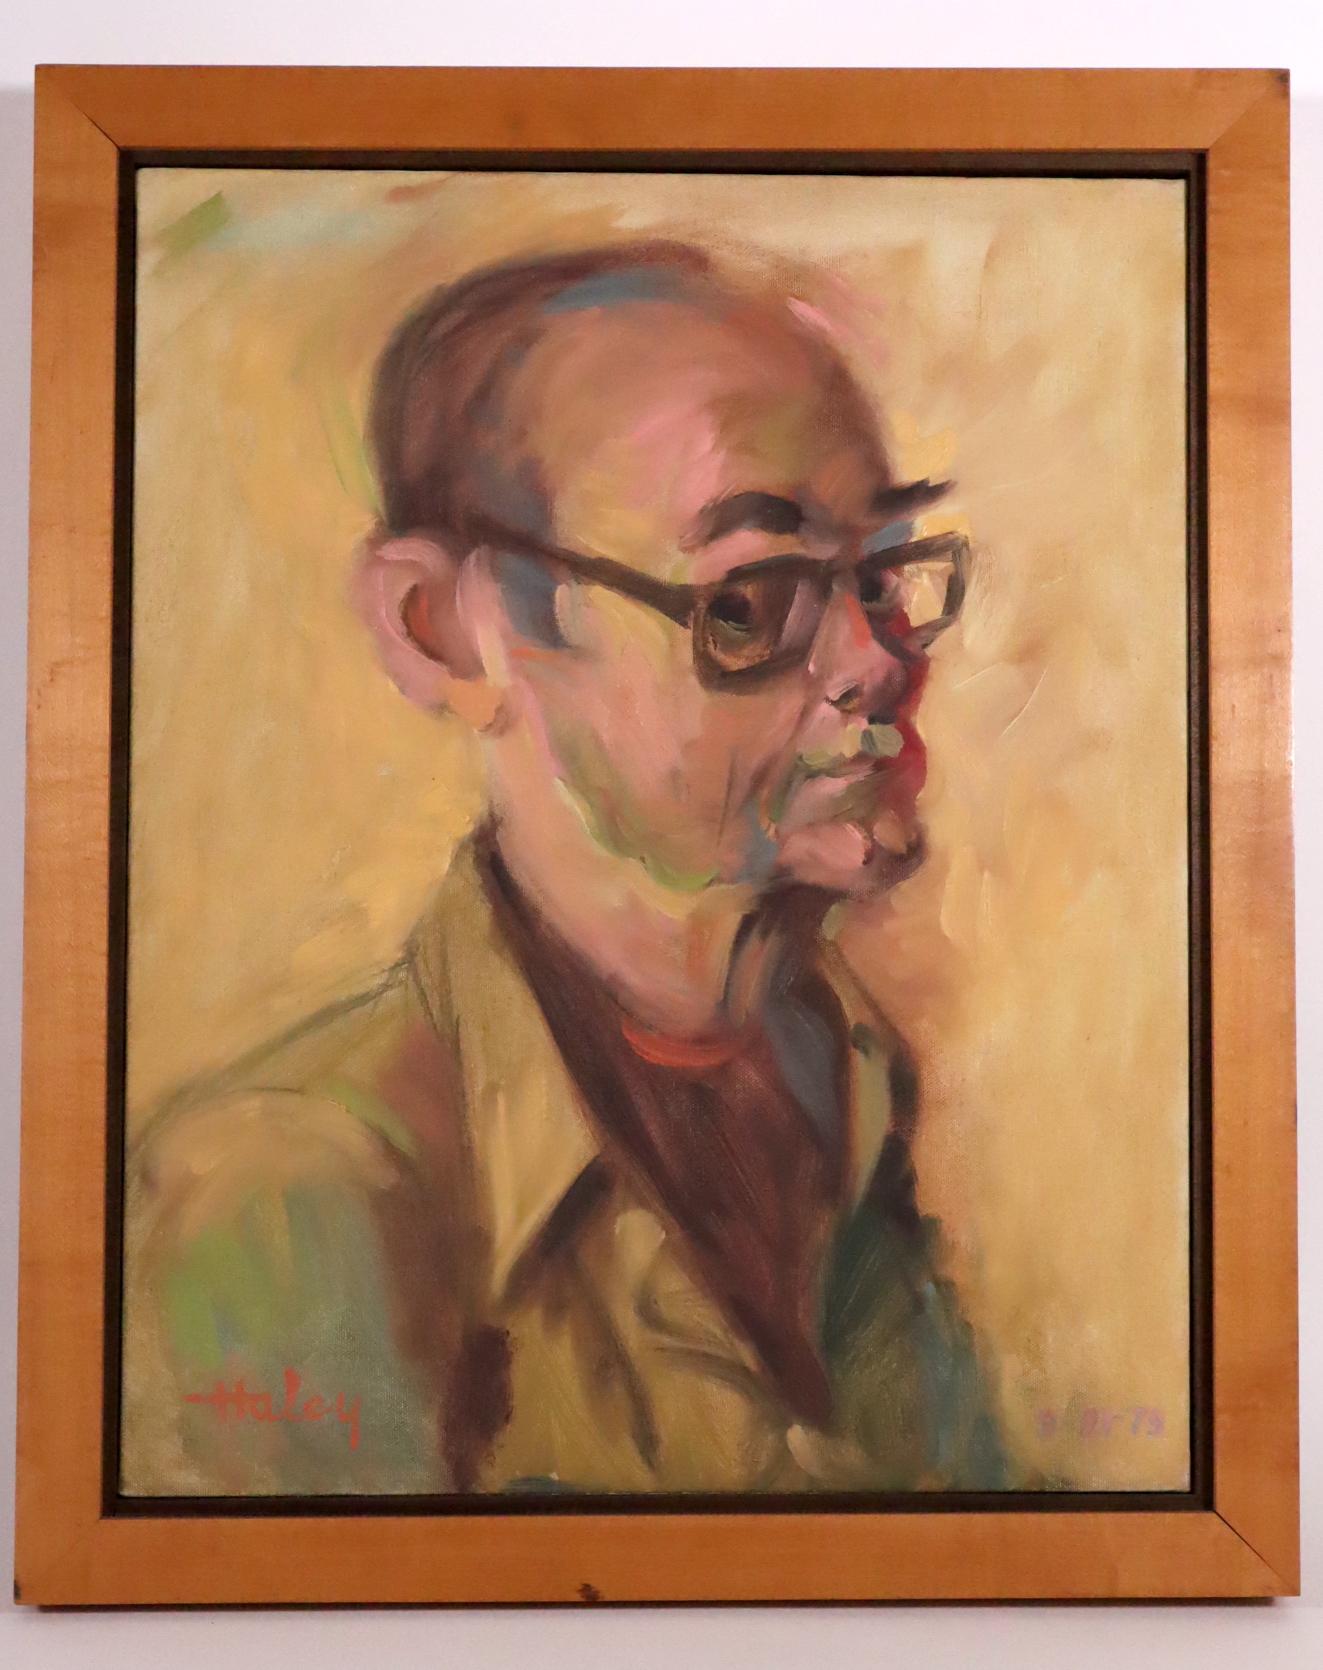 Self Portrait by John Charles Haley (American, 1905-1991).  Oil on canvas, signed lower left and dated 9-21-79 lower right.  In excellent condition.  Framed.  
Exhibited: 
George Krevsky Gallery, San Francisco, exhibition label